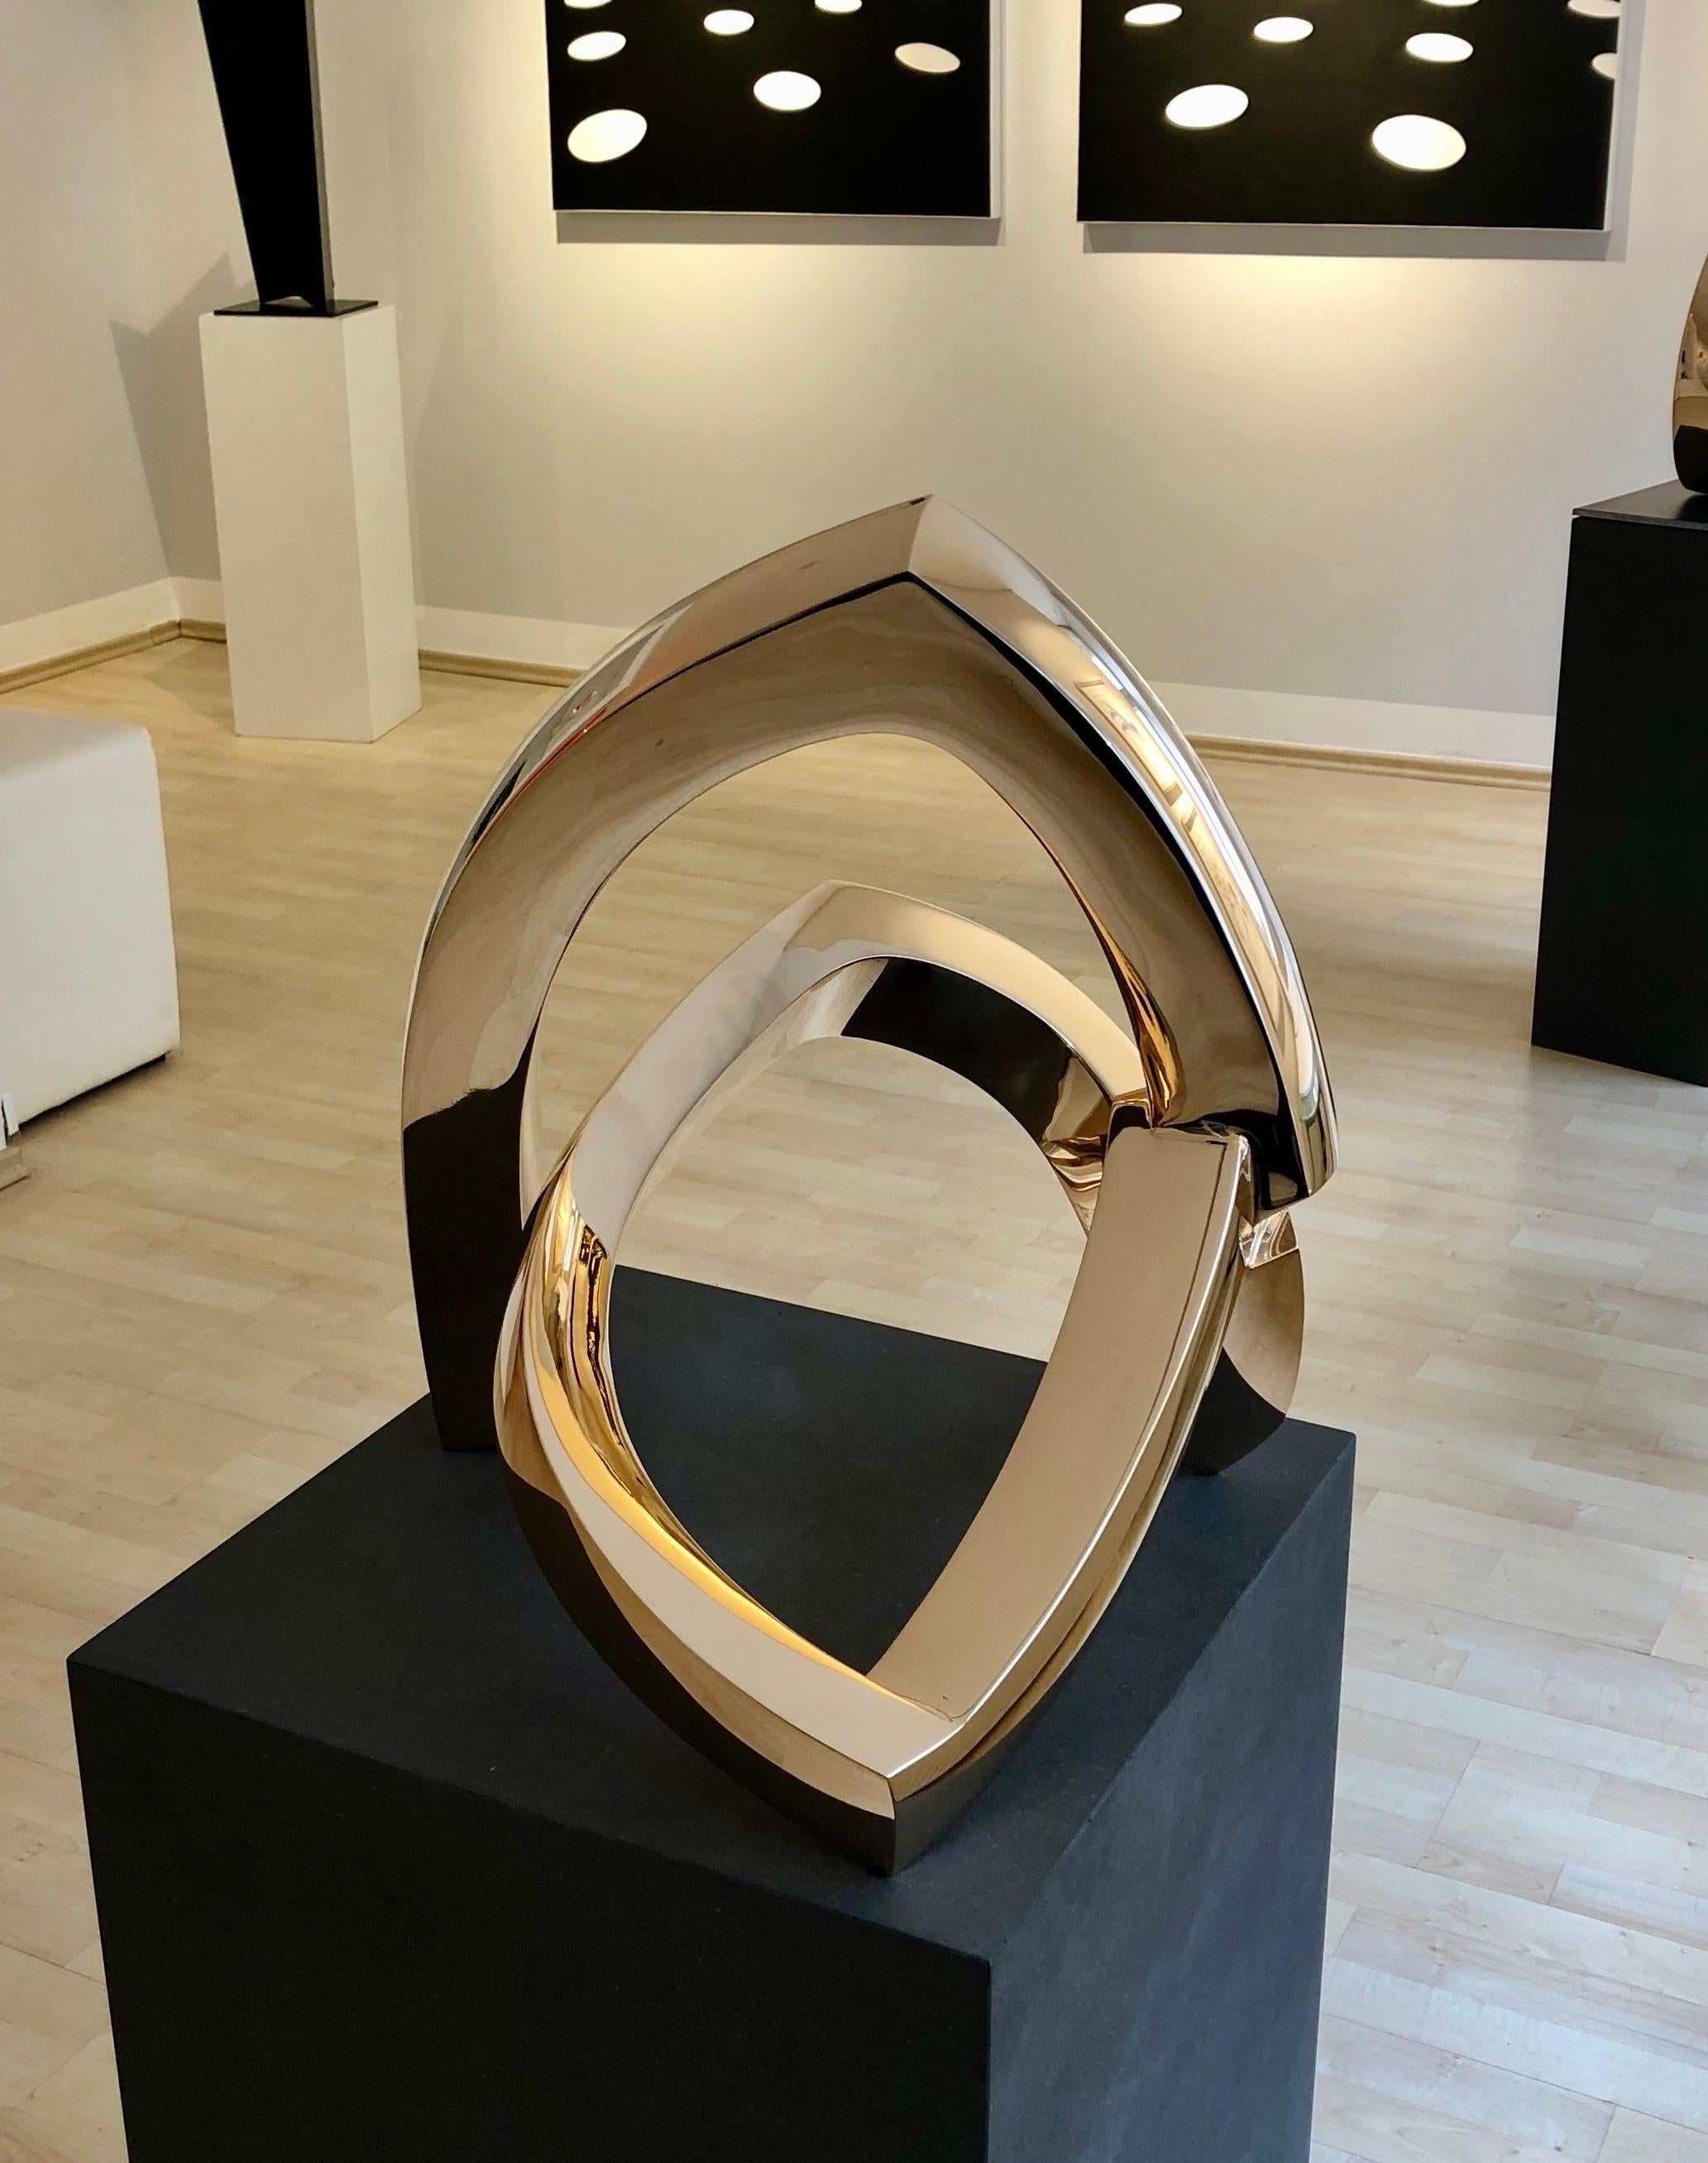 Bronze Sculpture 'O.T. VII' by Carola Eggeling
Abstract sculpture with beautiful curved lines.

German bronze sculpture
Bronze Polished 
Certificate of authenticity
Numbered and signed artwork
Limited edition of 9
Measures: H. 41 x 41 x 46